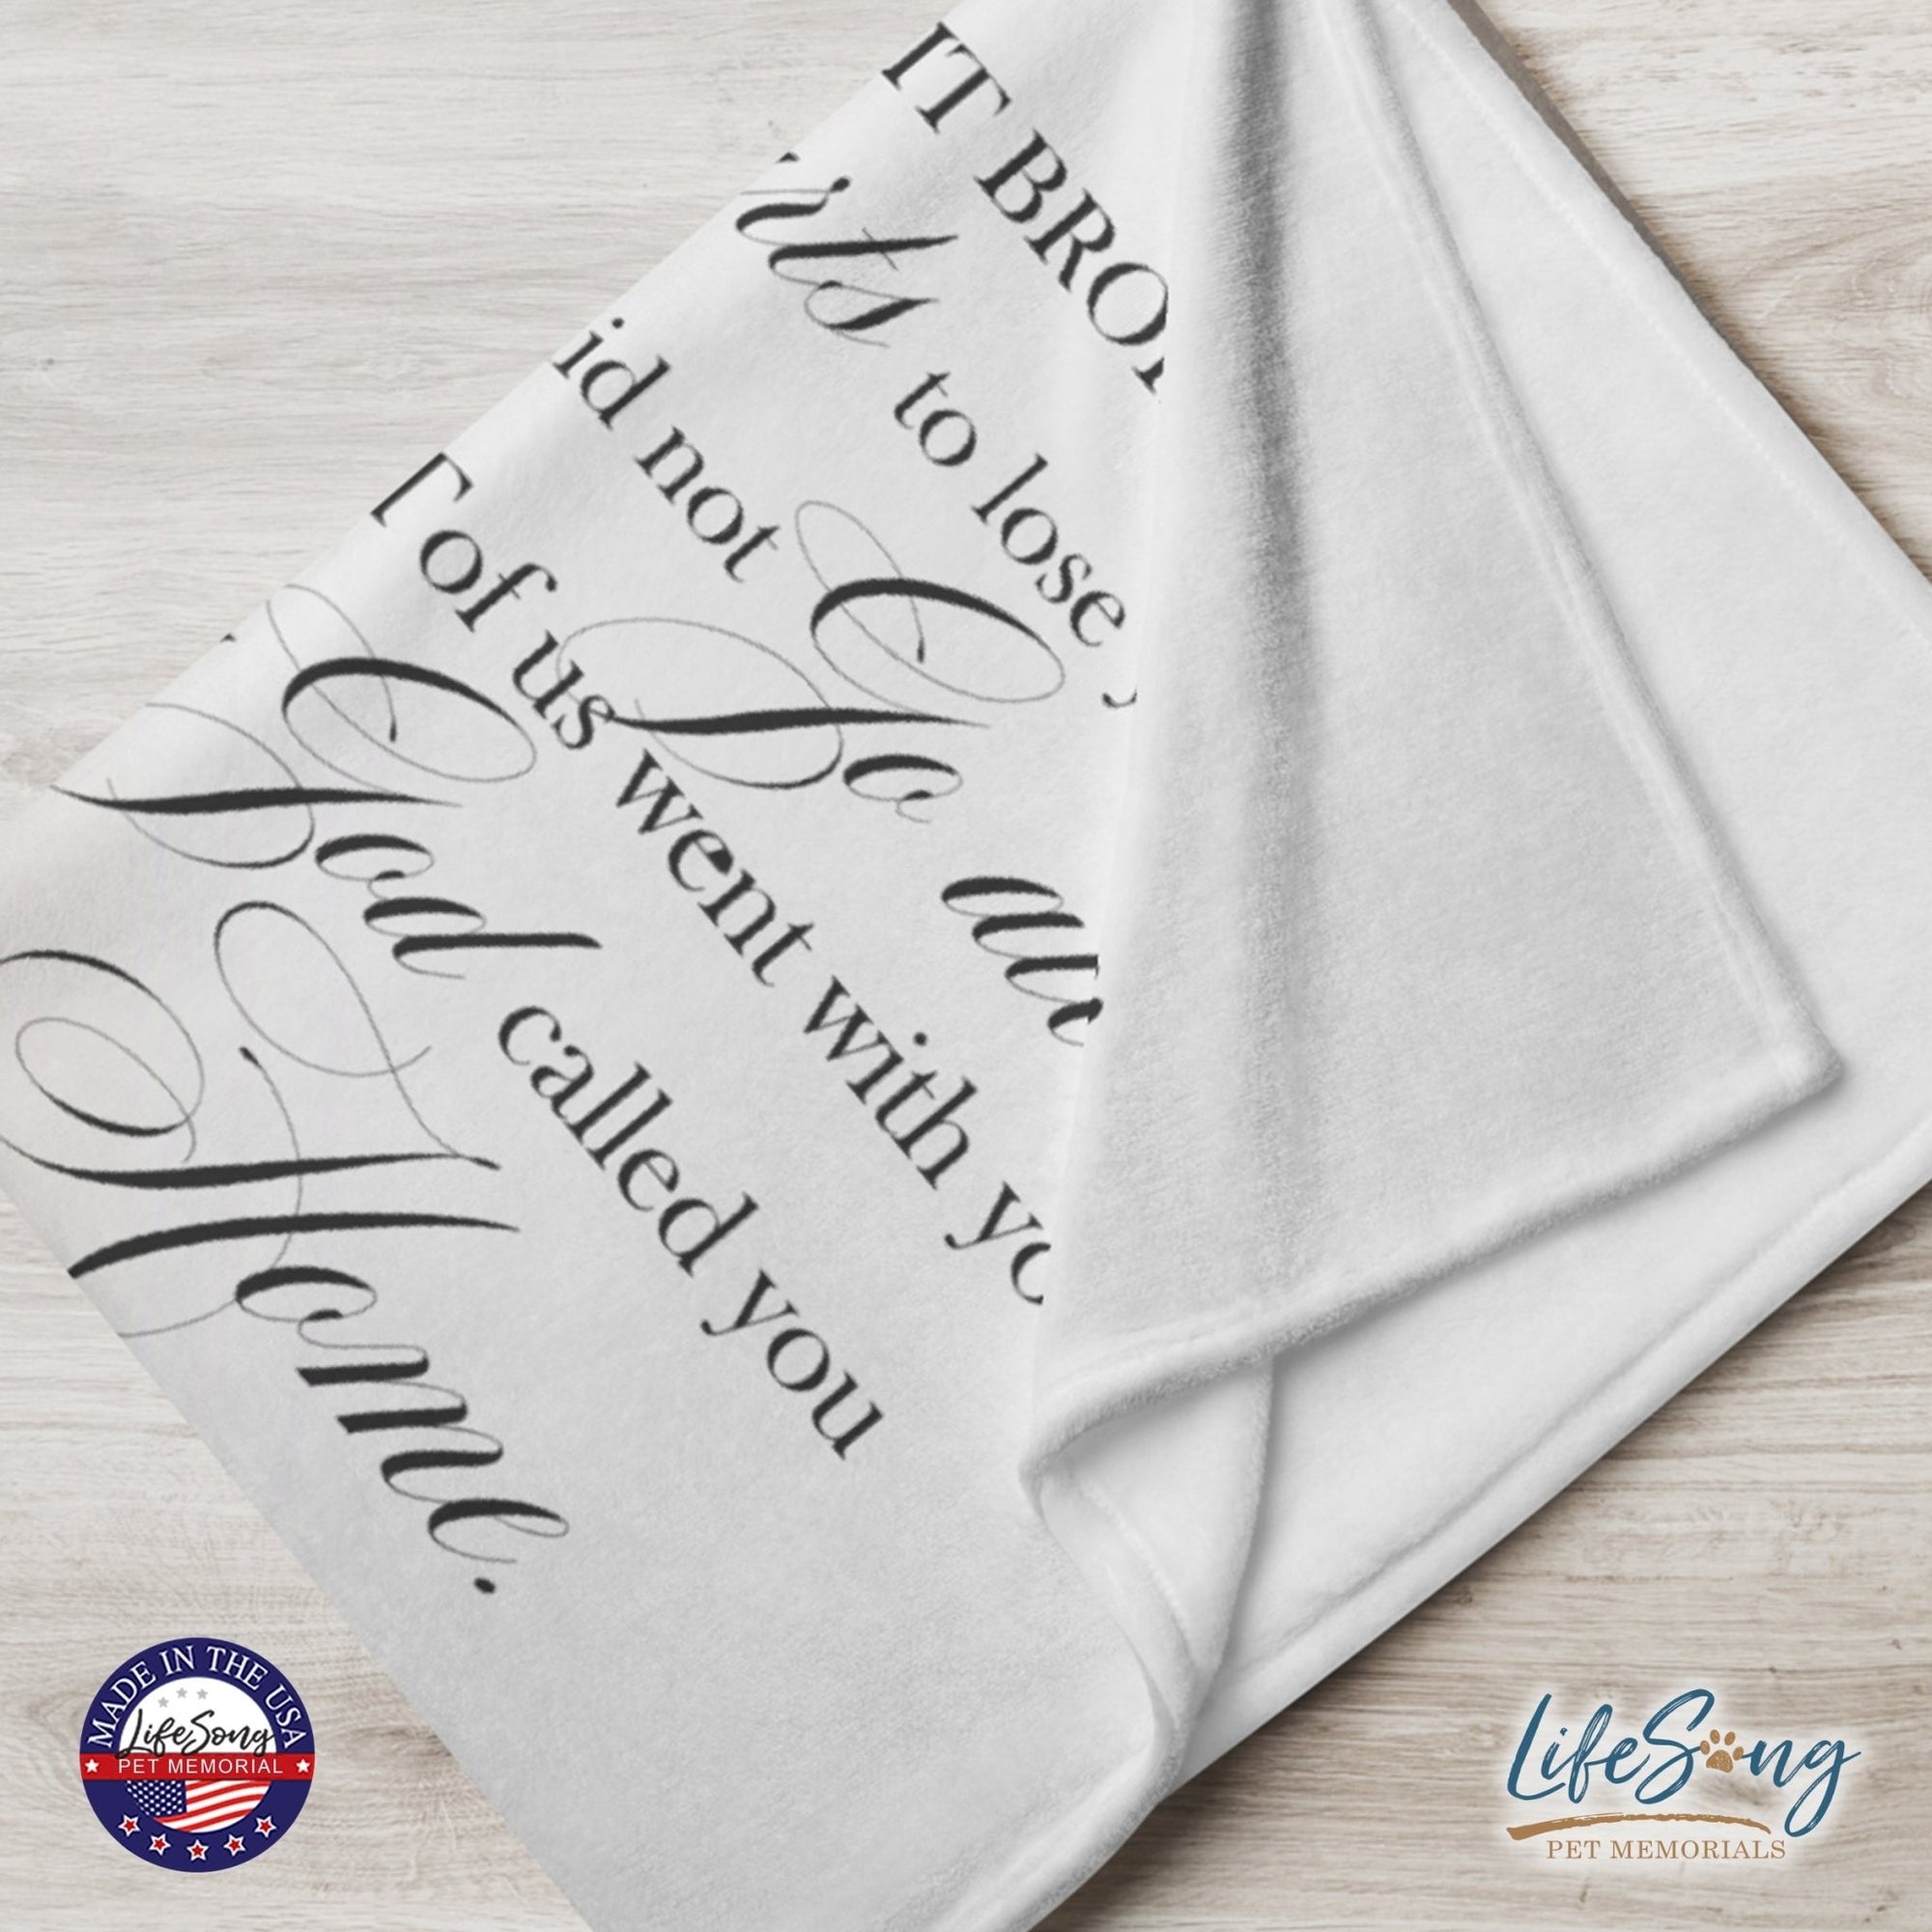 Personalized Pet Memorial Printed Throw Blanket - It Broke Our Hearts To Lose You - LifeSong Milestones